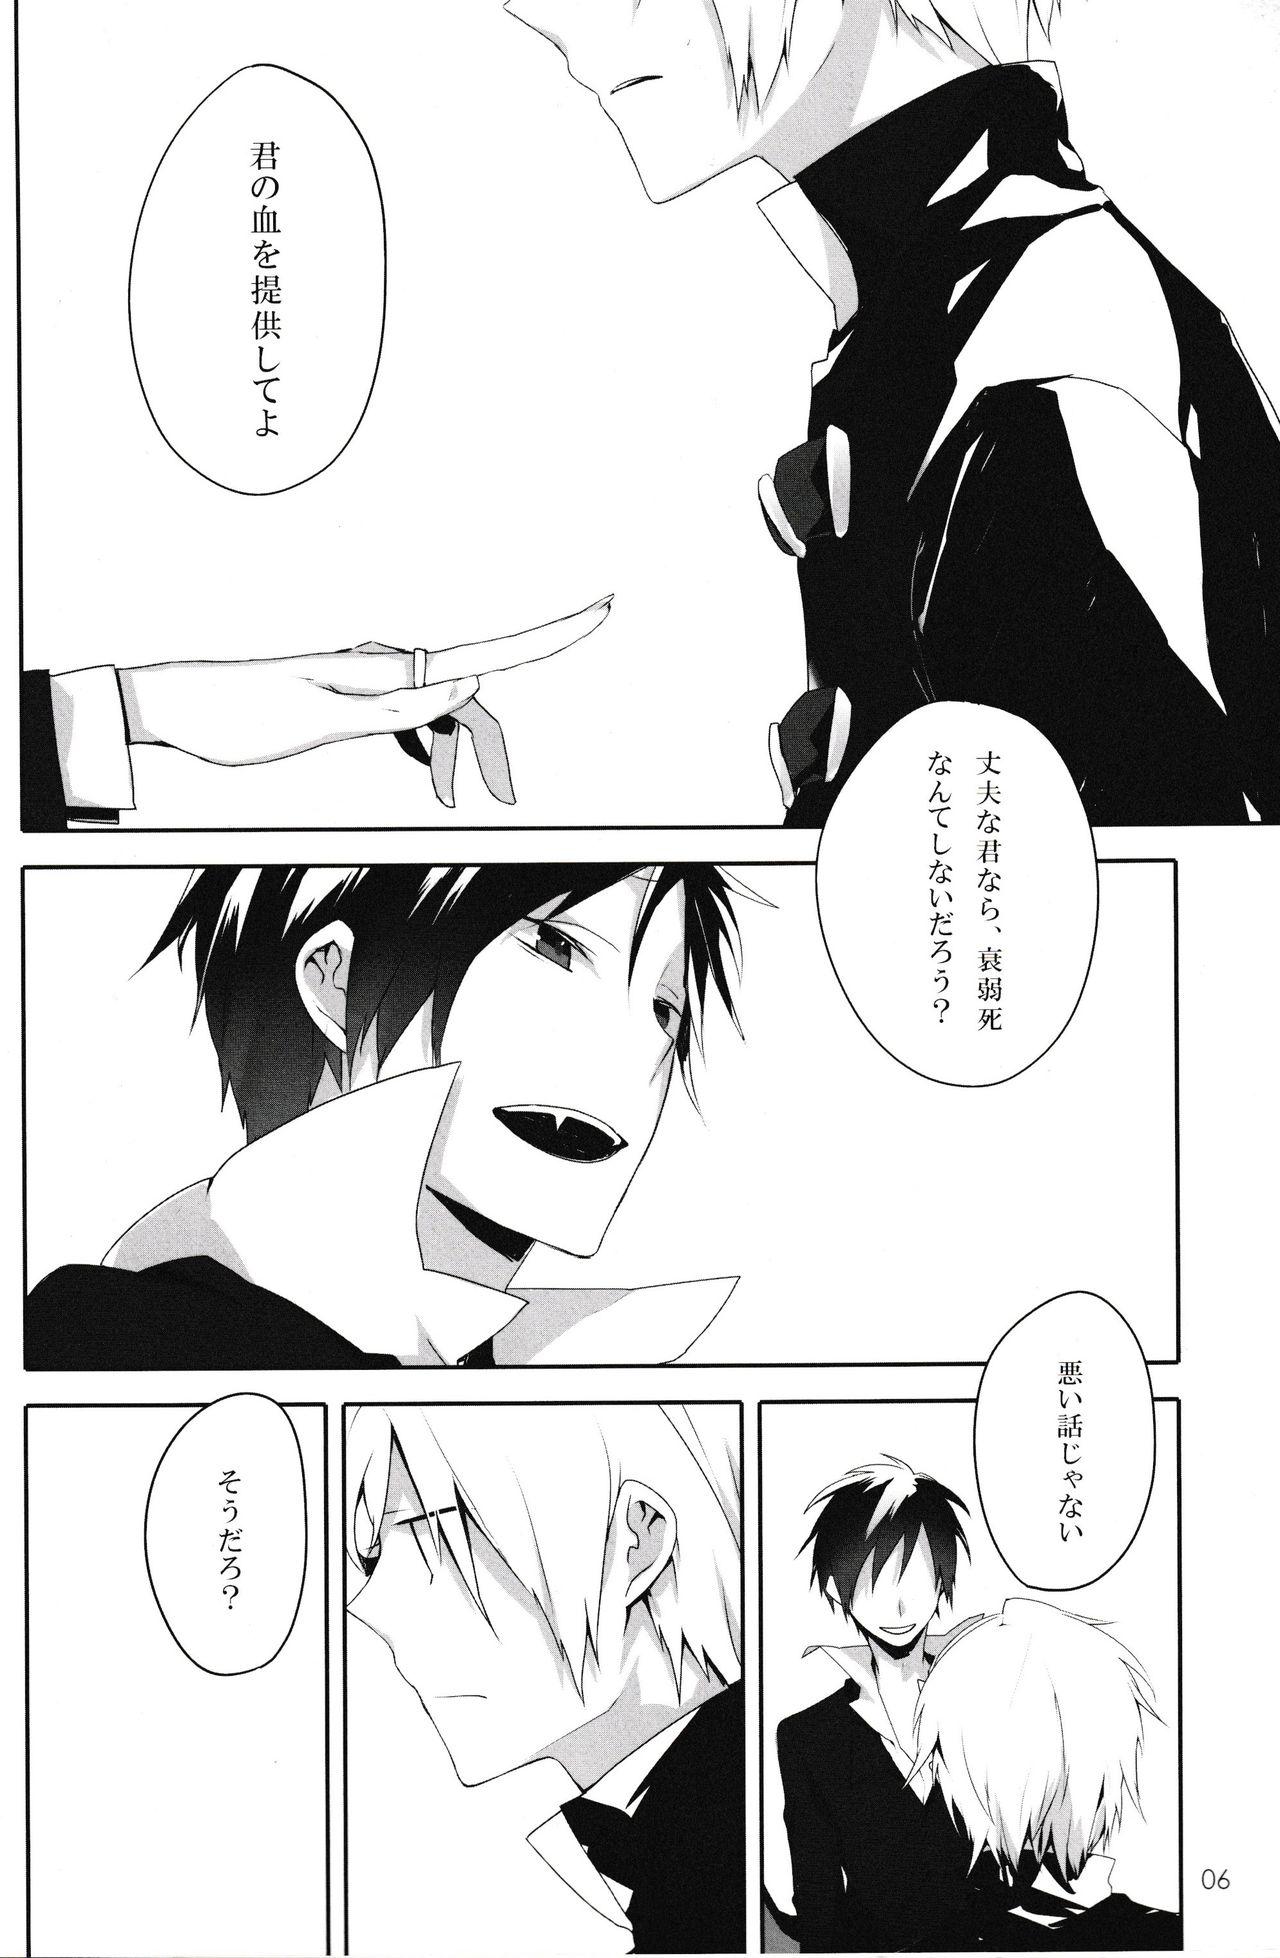 Time In The Dark - Durarara Little - Page 6